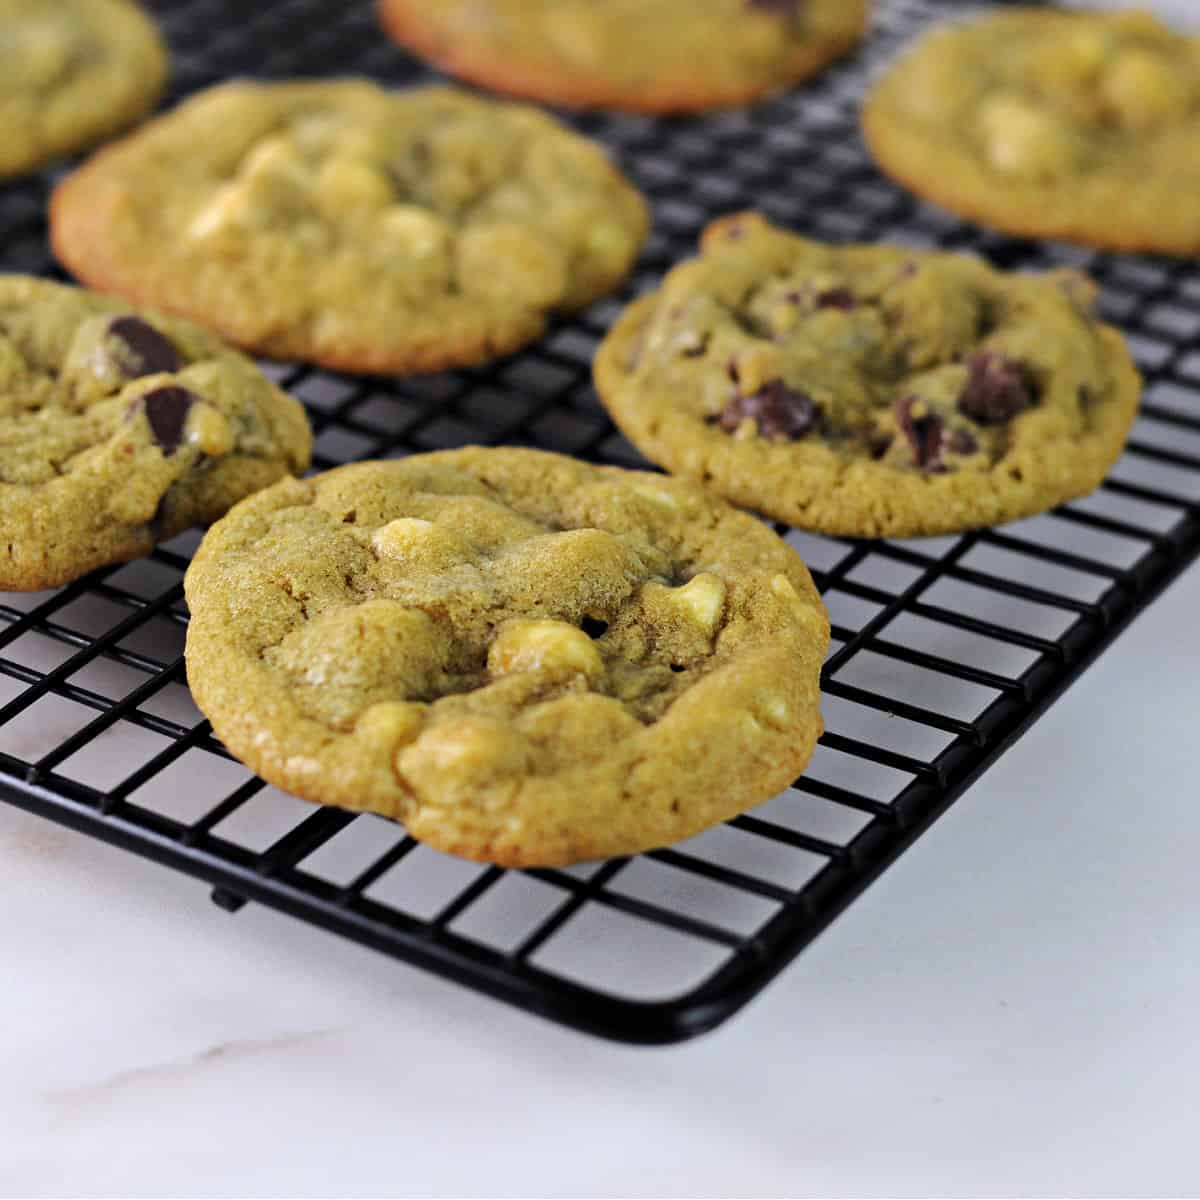 close up of matcha cj=hocolate chip cookies cooling on a wire rack.